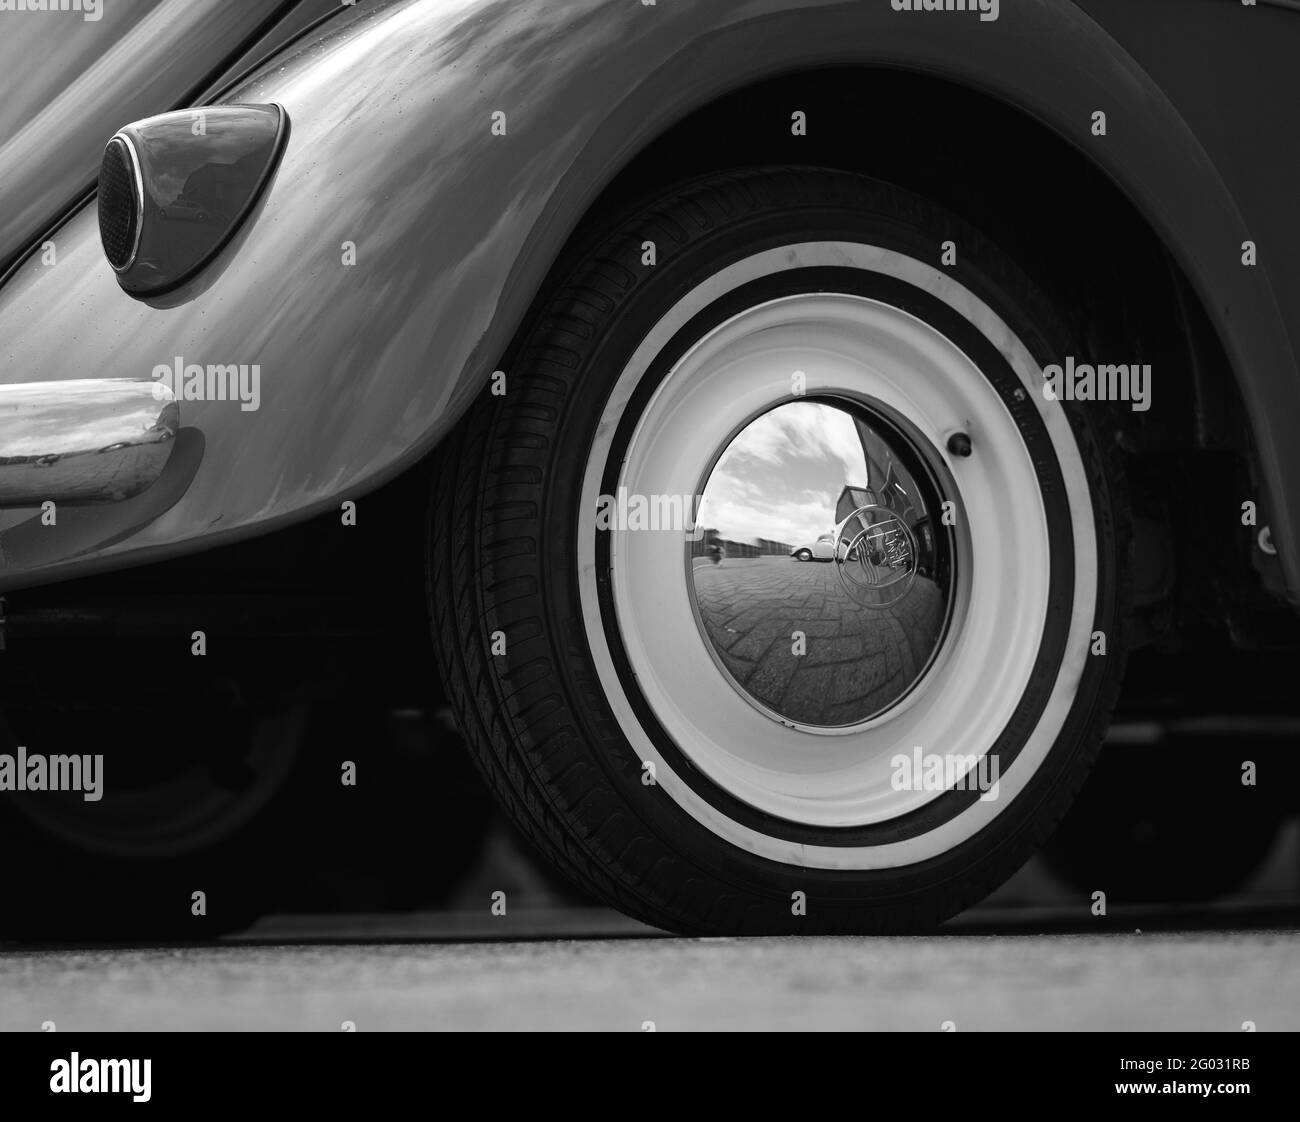 ZOETERMEER, NETHERLANDS - May 20, 2021: Retro car Volkswagen Beetle black and white shot of a rear wheel with a reflection of a VW Beetle in it. Stock Photo